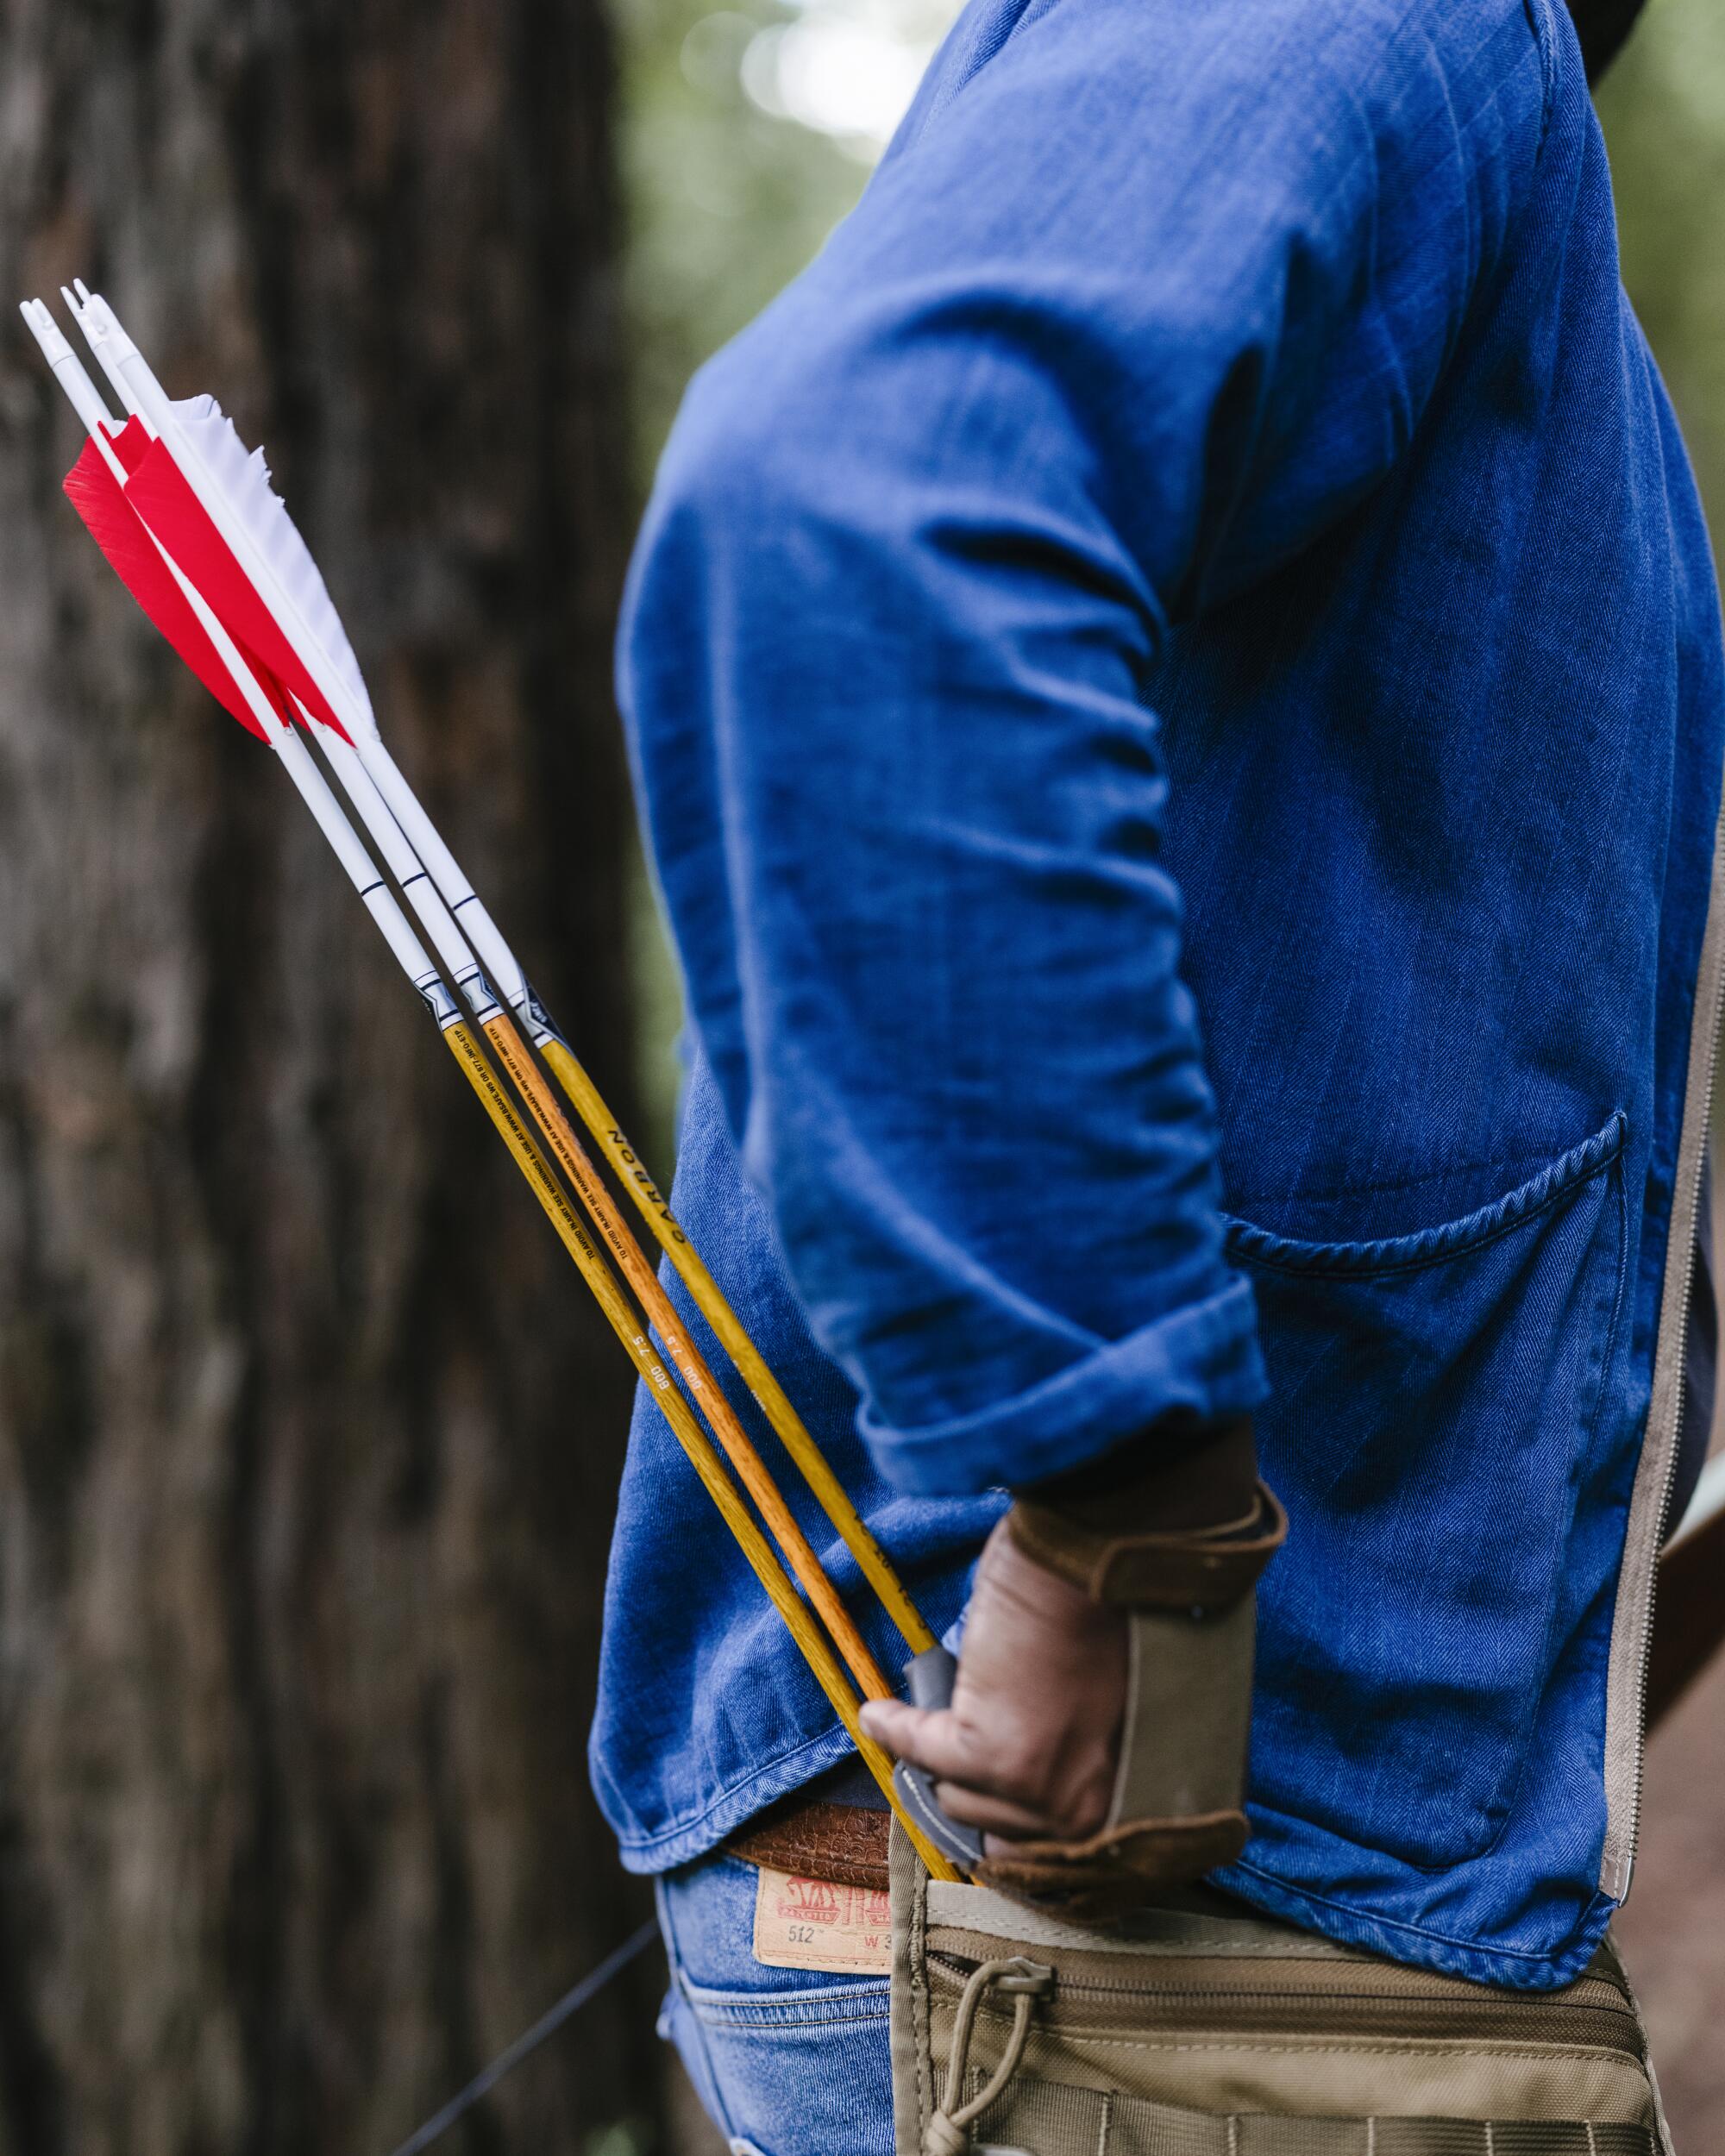 A person wearing a blue shirt reaches into a quiver of arrows.